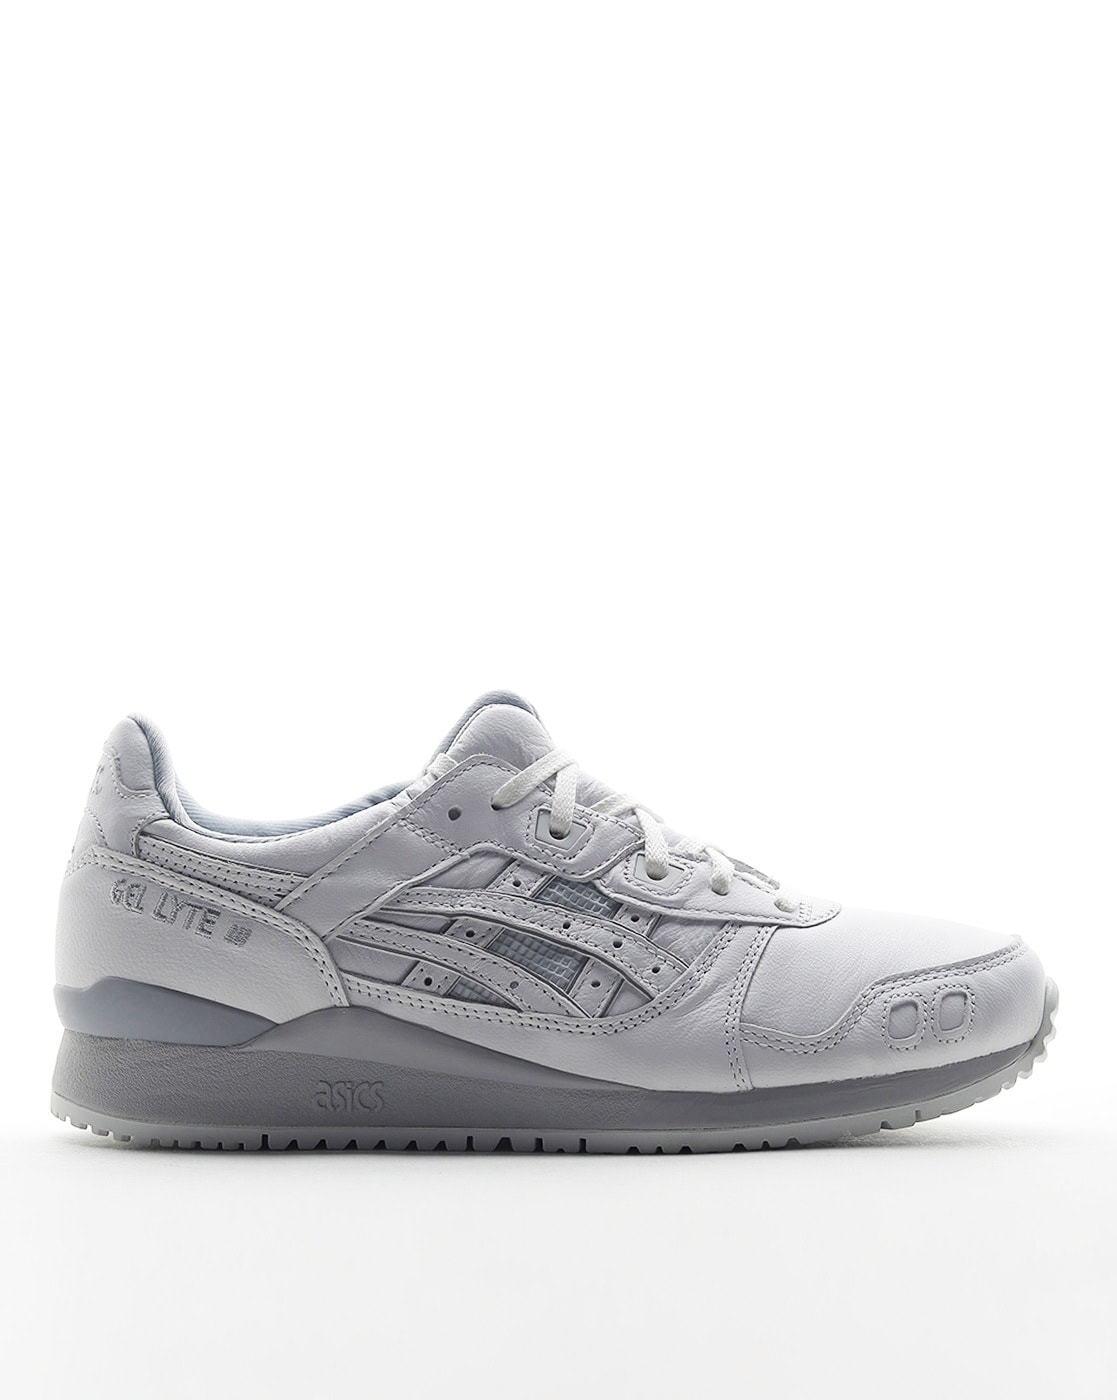 asics casual shoes for women